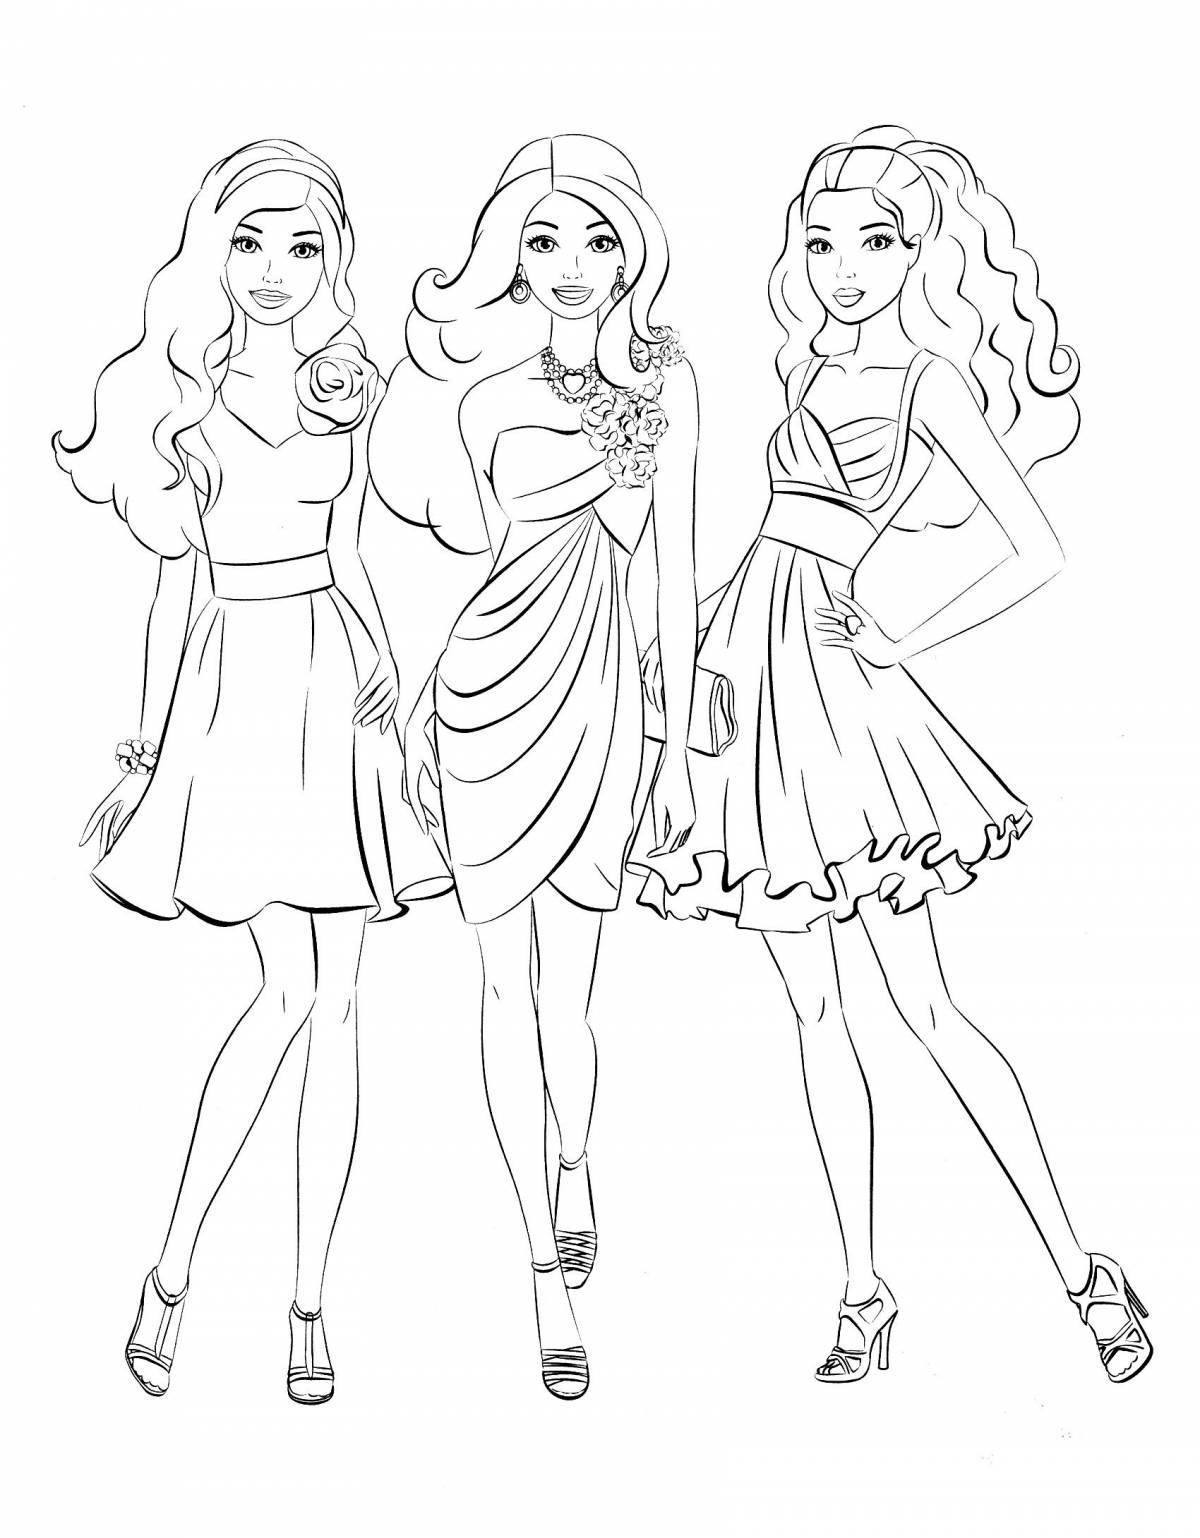 Exquisite barbie doll coloring book for kids